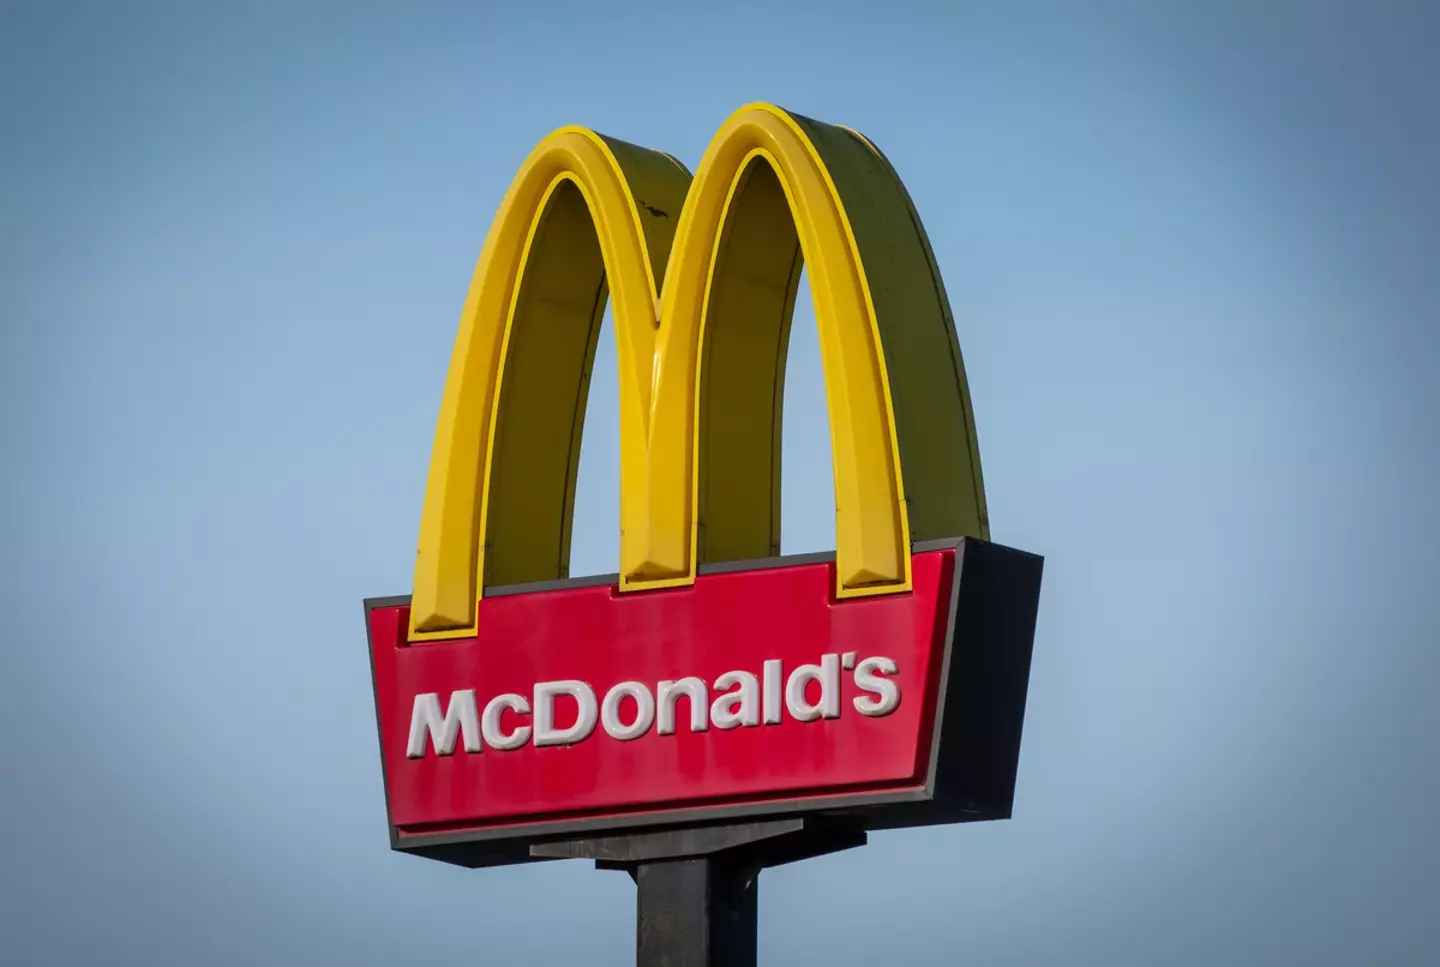 McDonald's has brought back some old favourites and introduced some new items for its Easter menu.